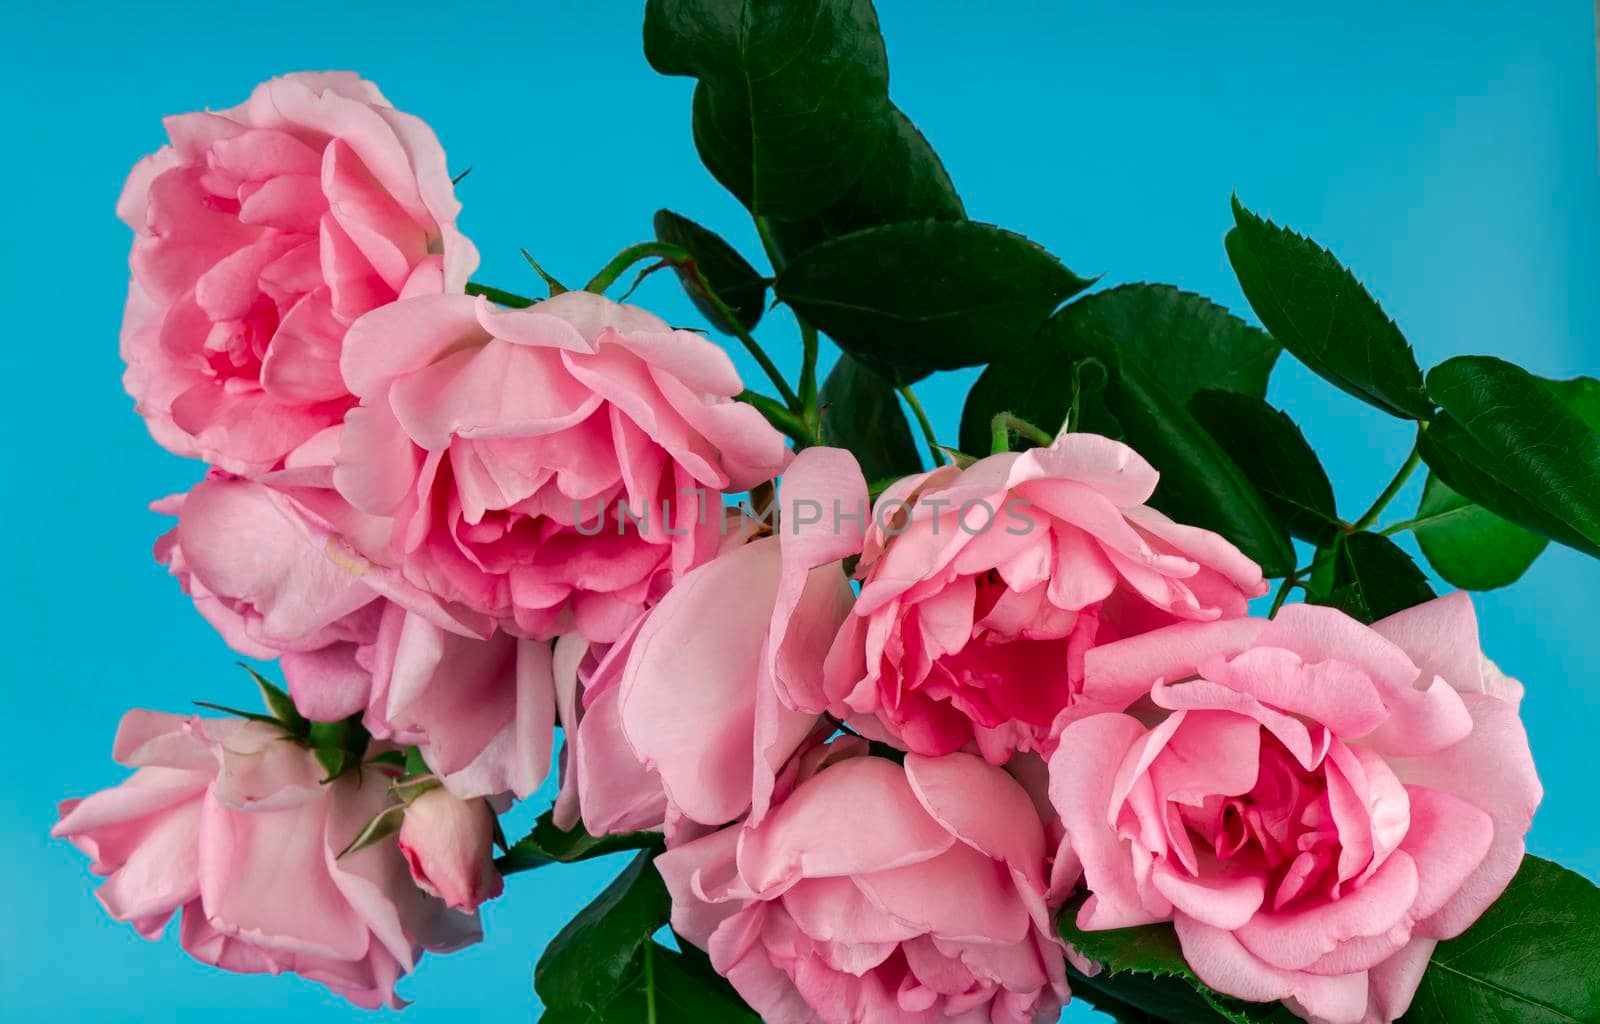 a bouquet of flowers from roses on a blue background